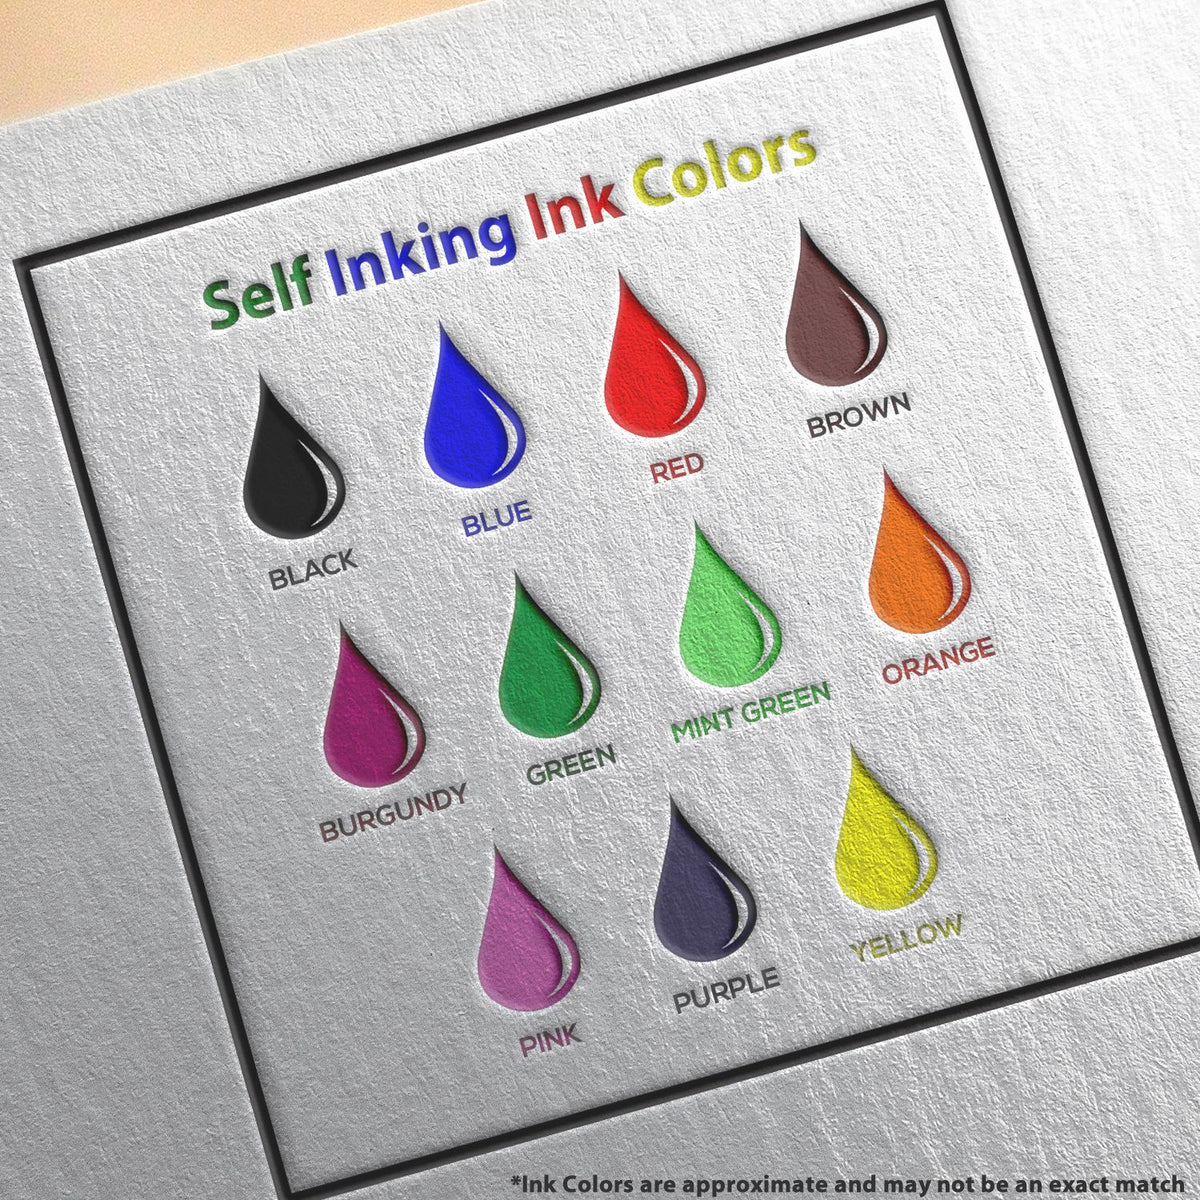 A picture showing the different ink colors or hues available for the Self-Inking Maryland PE Stamp product.